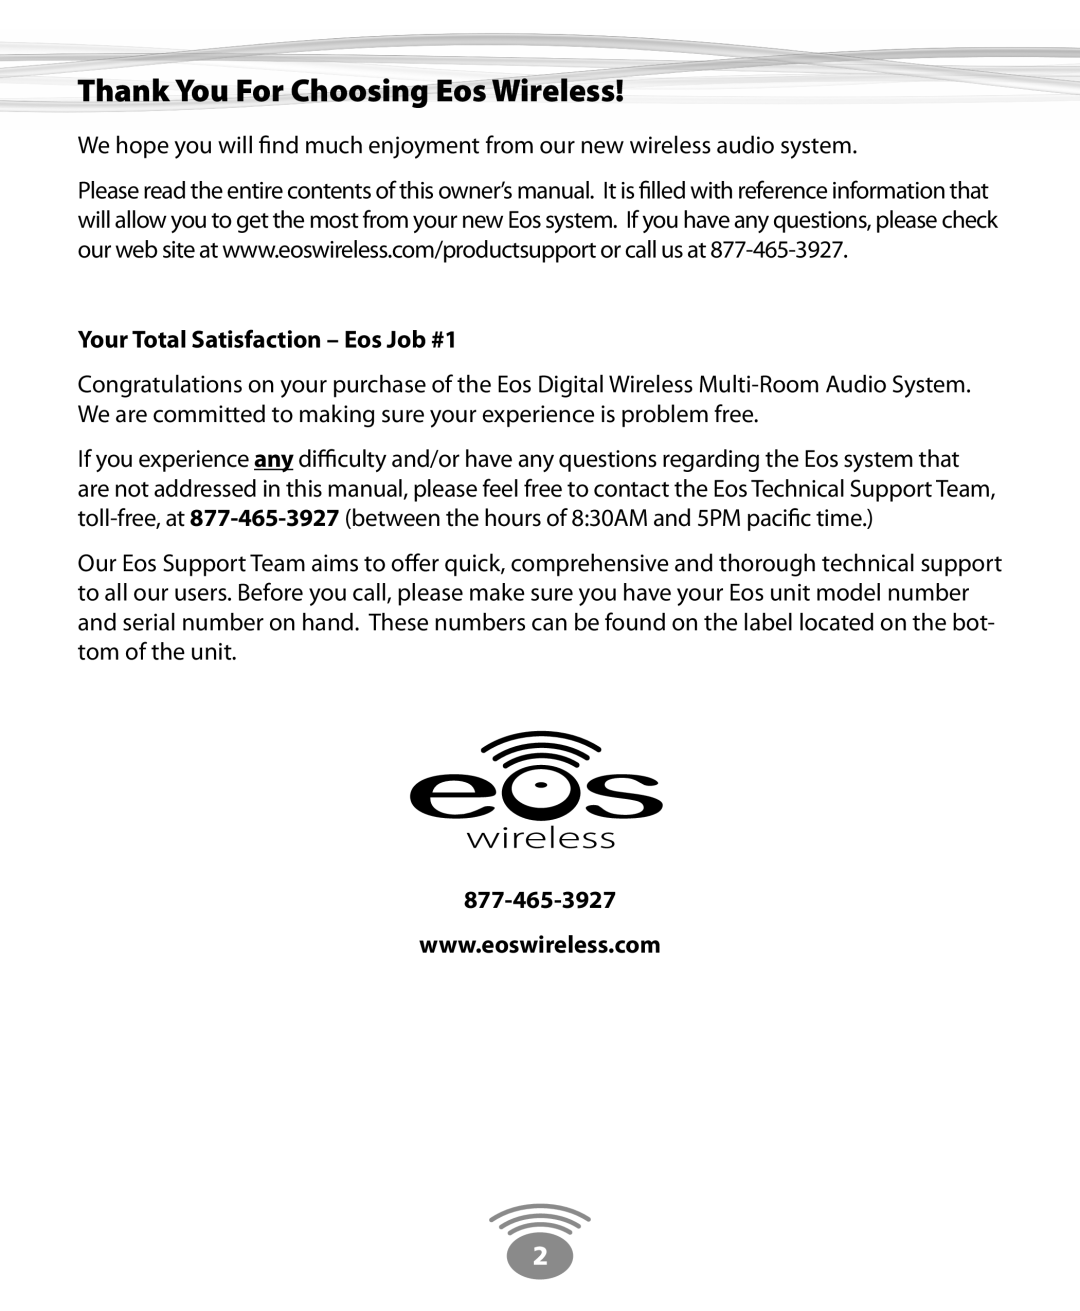 Eos Wireless Digital Wireless Multi-Room Audio System owner manual Thank You For Choosing Eos Wireless 